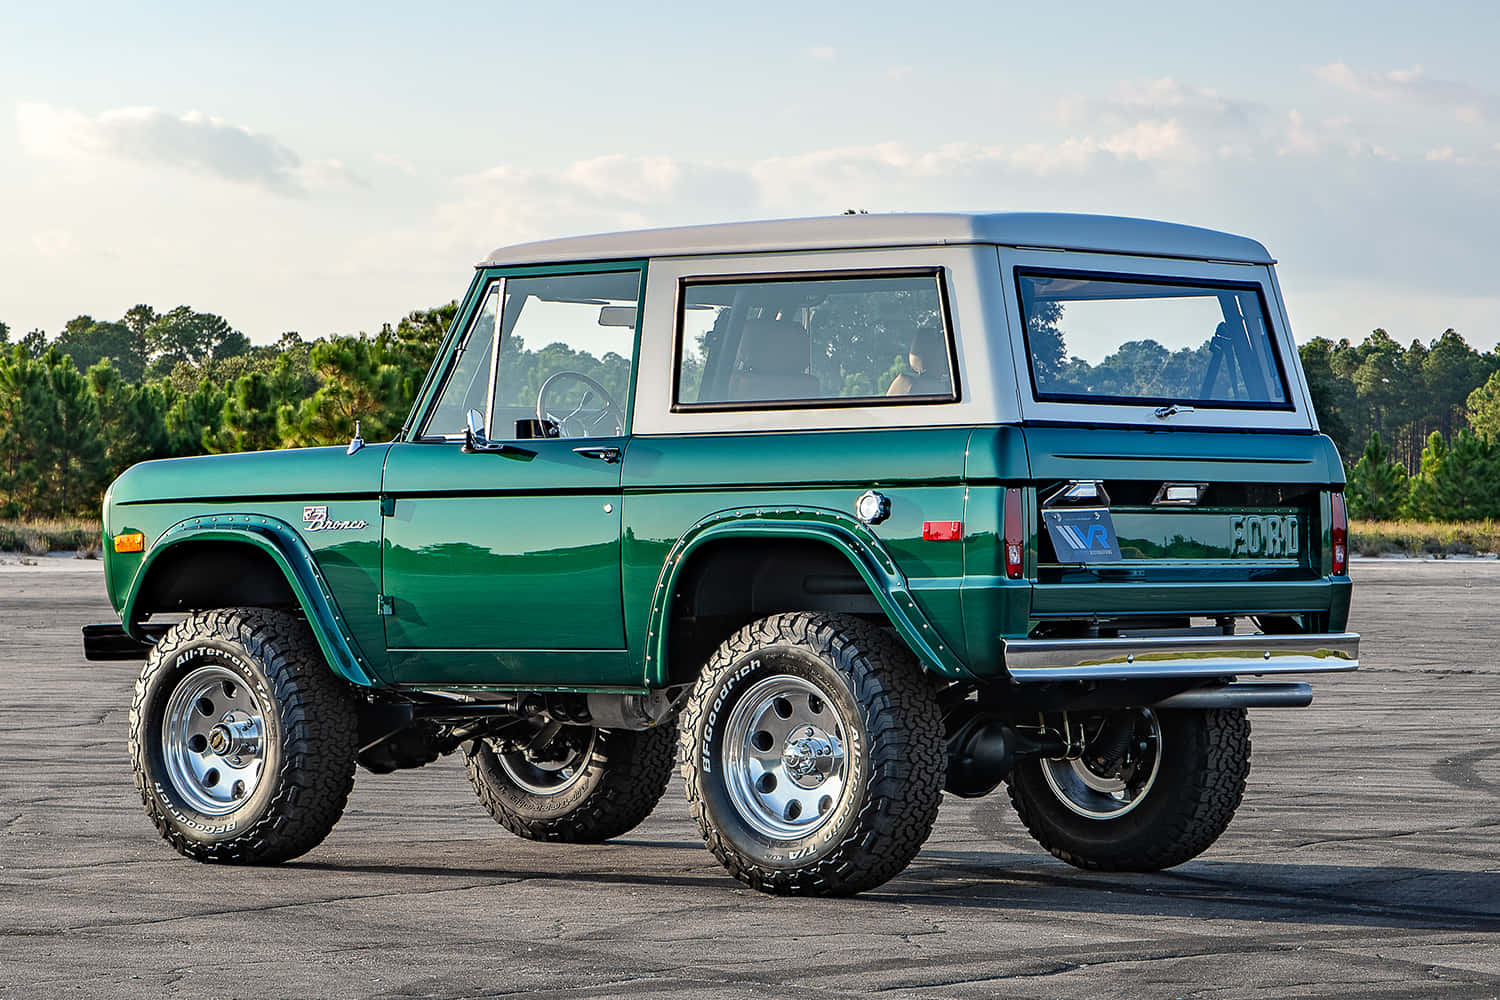 Ford Bronco sporting a rugged look